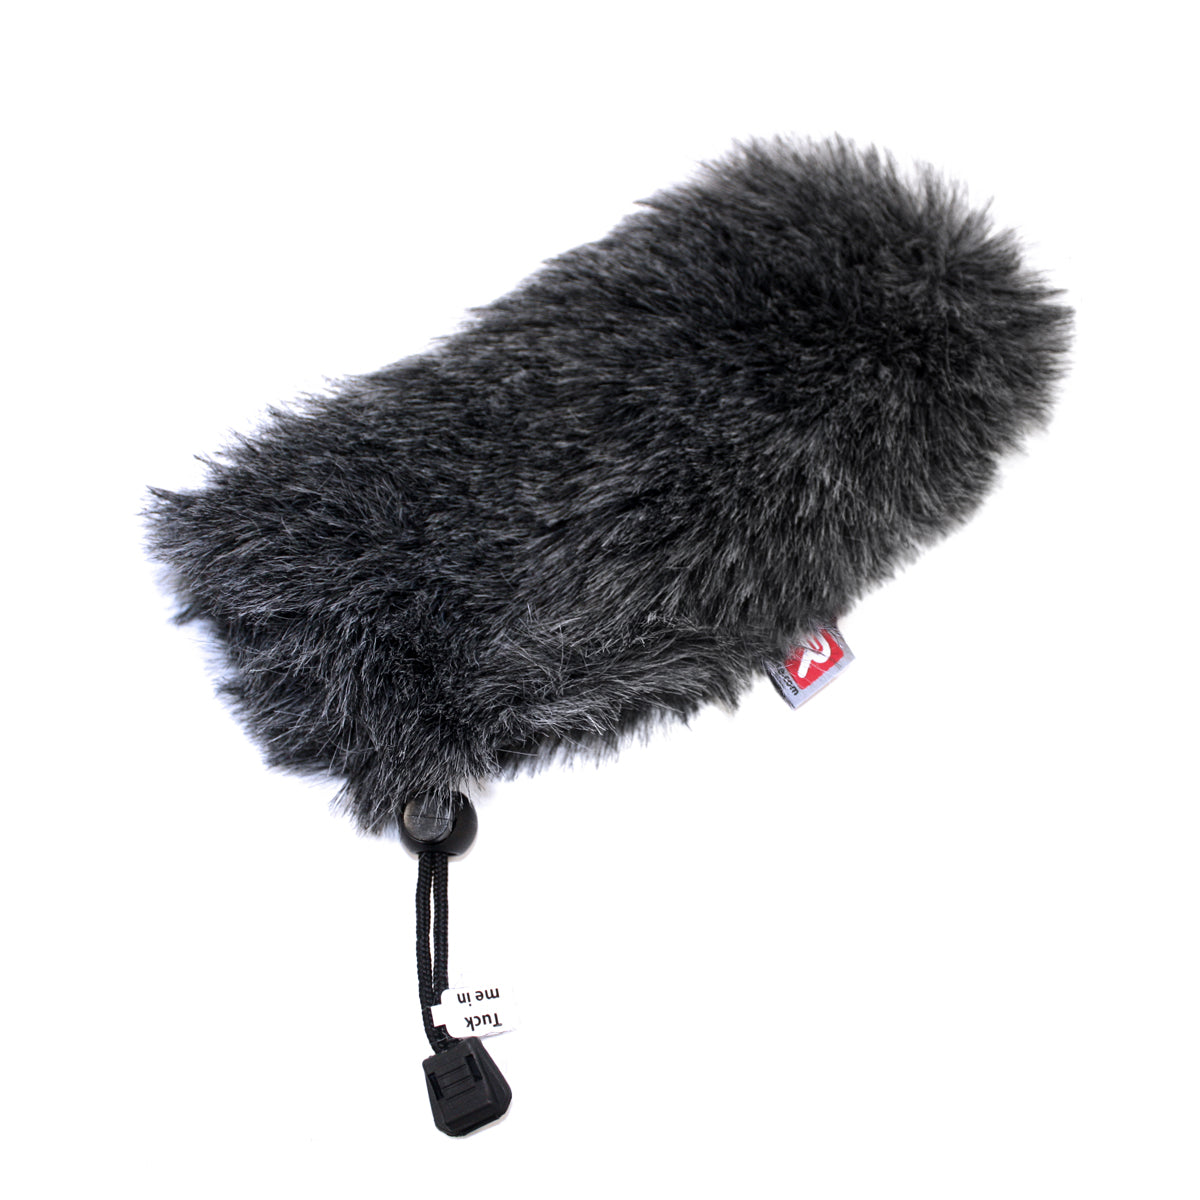 Rycote Special 190 Mini Windjammer, Grey, Synthetic Fur